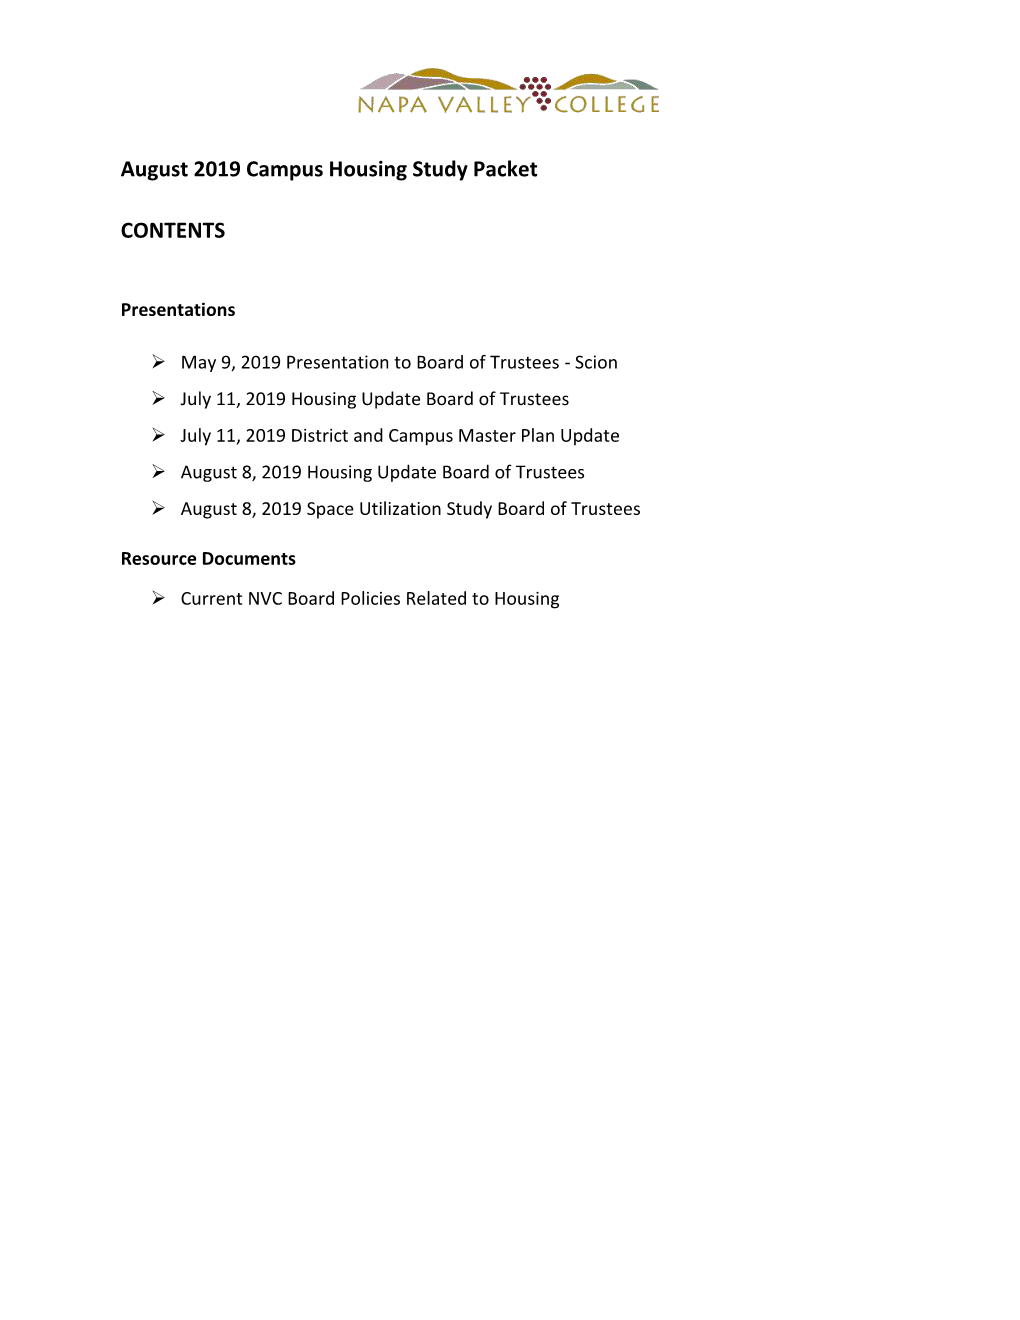 NVC Campus Housing Study Packet Aug 2019